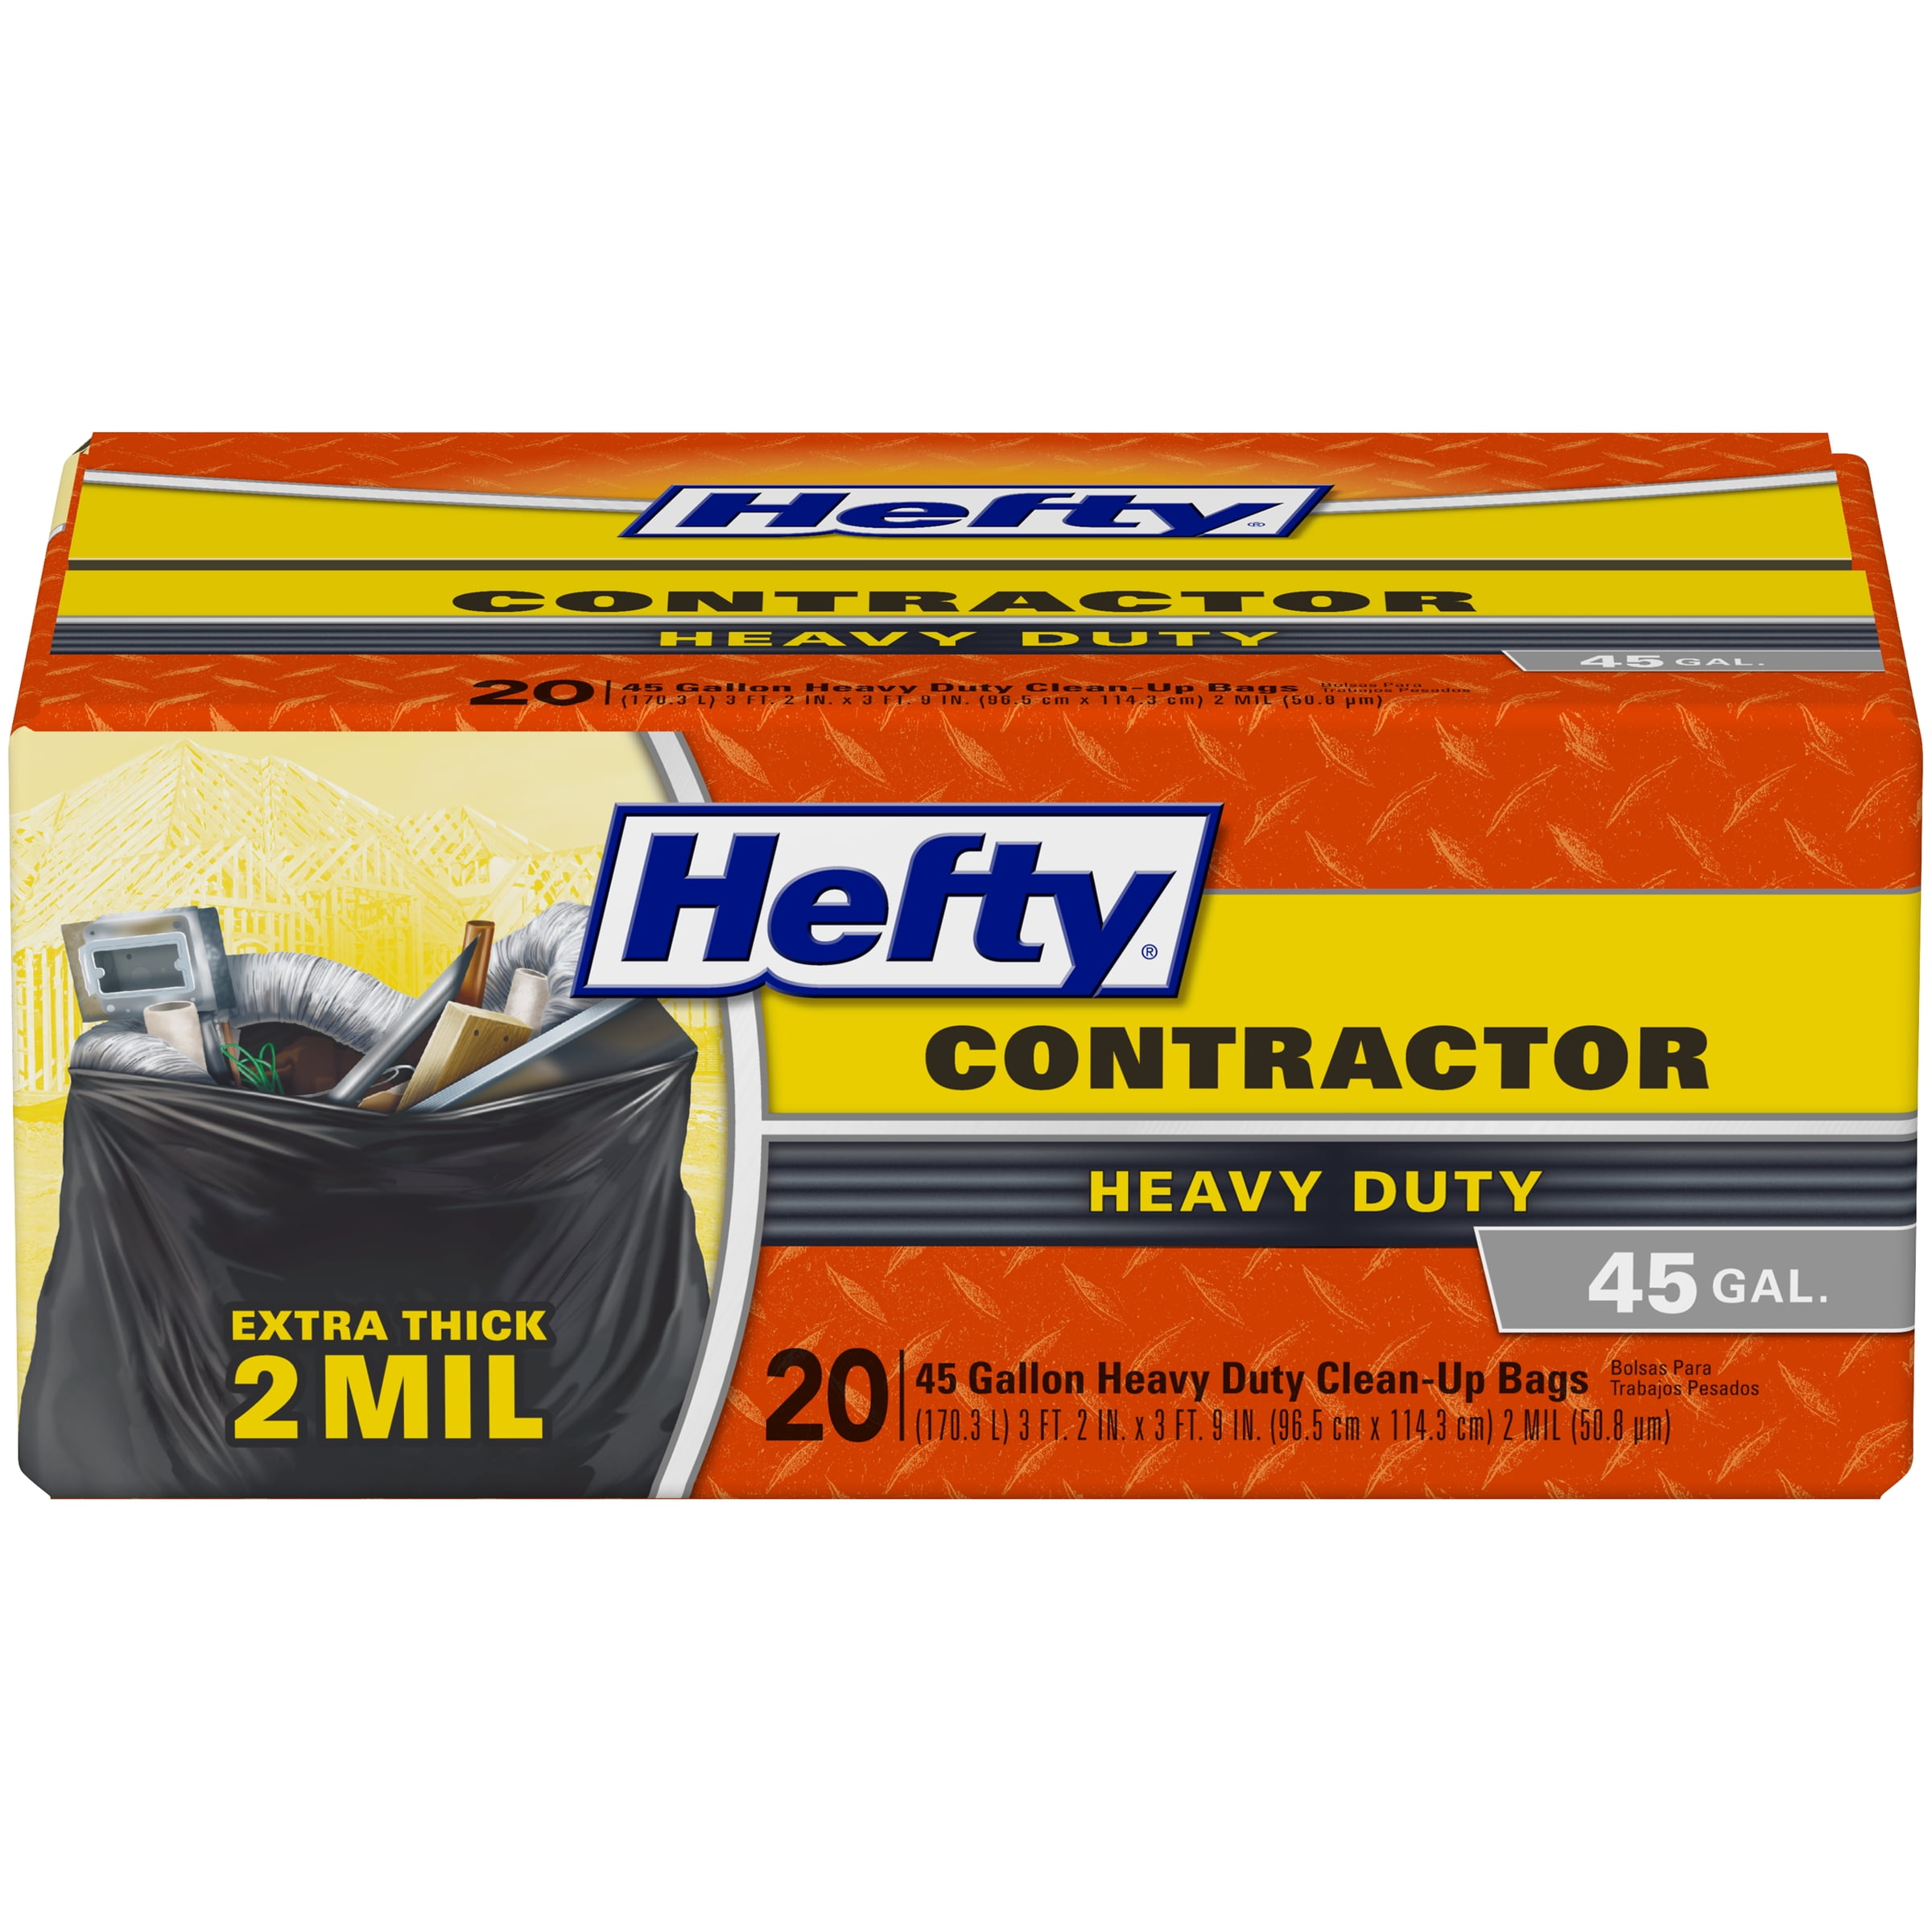 55 Gallon 16 Count Hefty Heavy Duty Contractor Trash Bags Details about    2 pack 